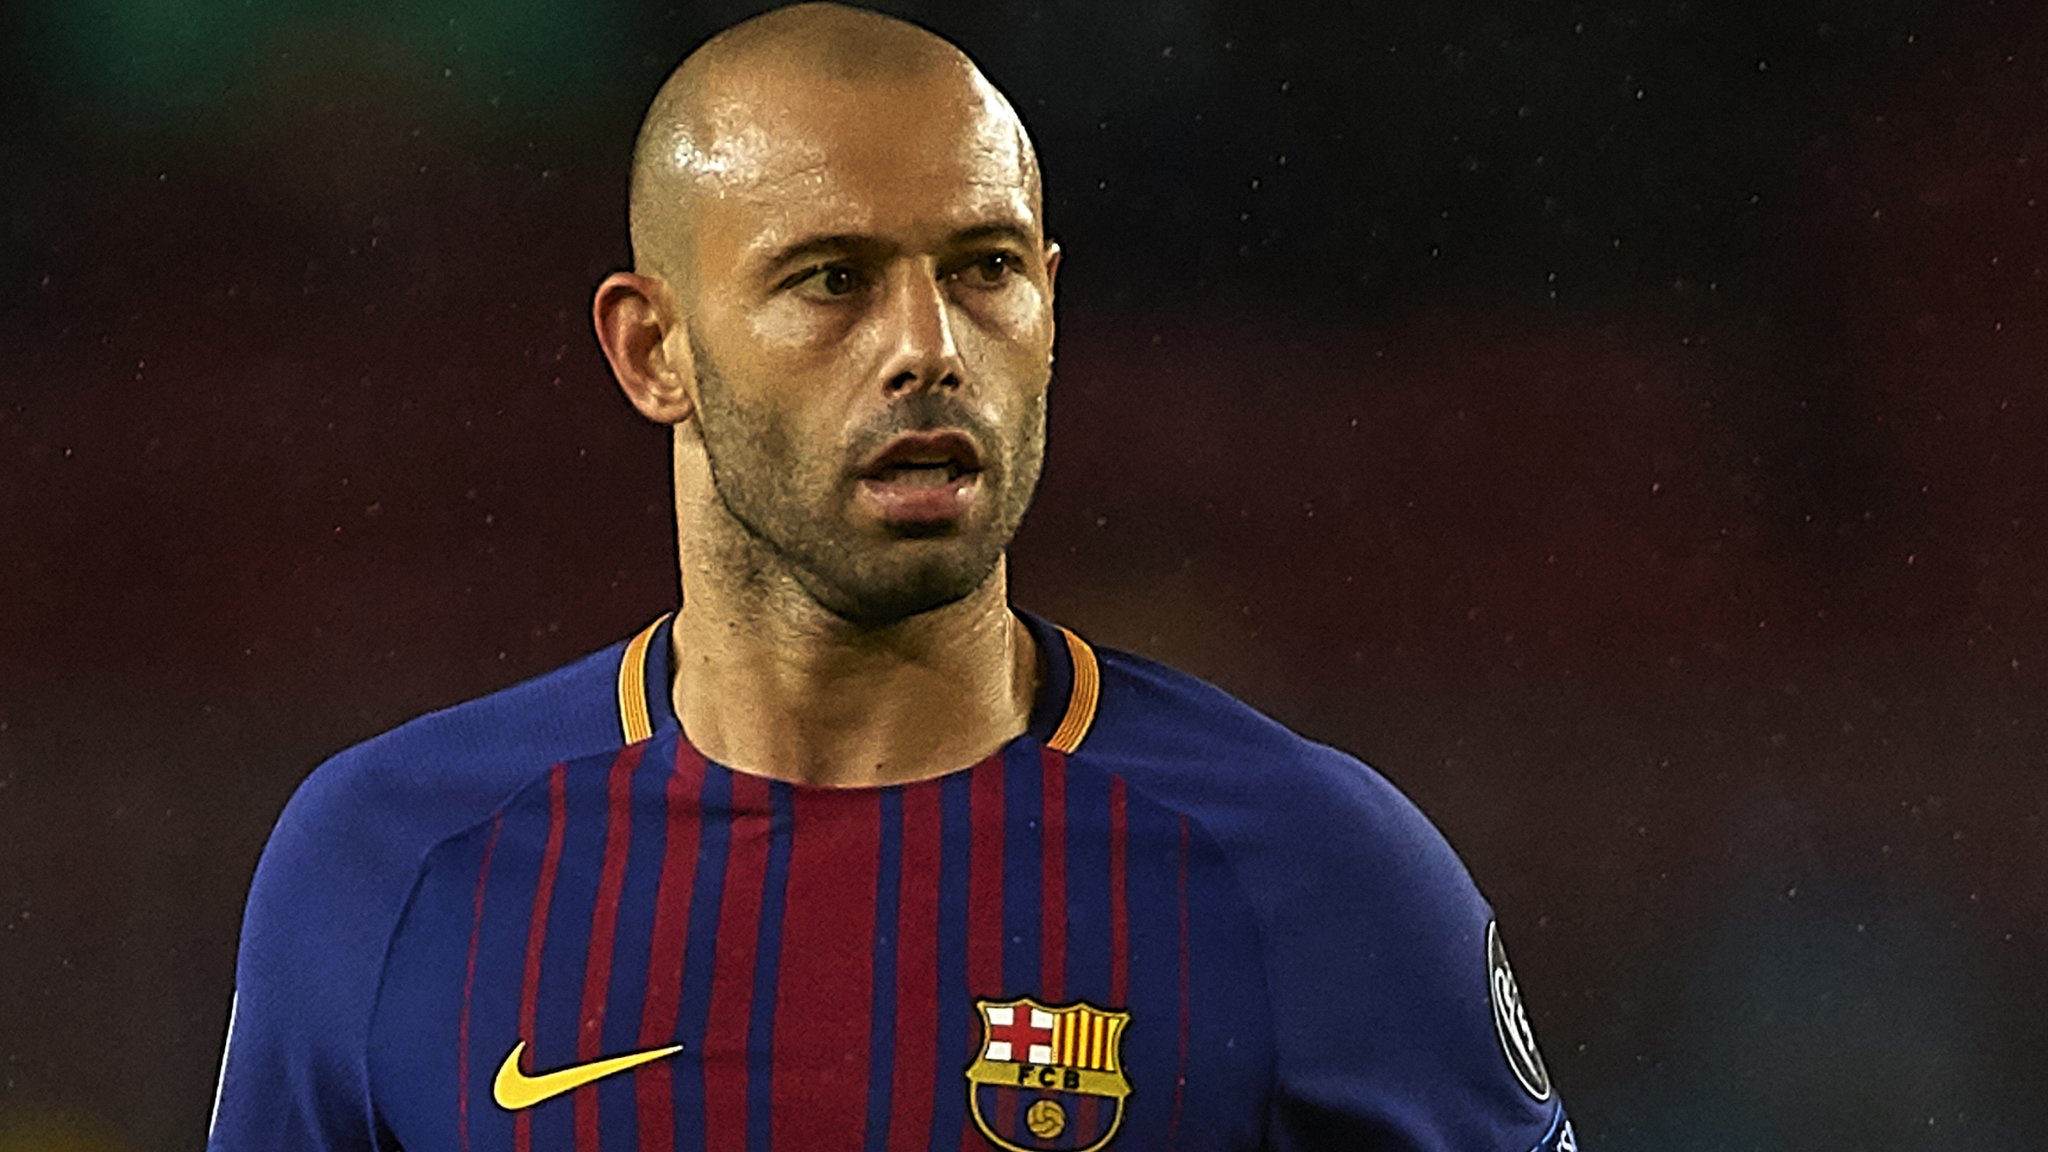 Mascherano moving to China after eight years at Barca